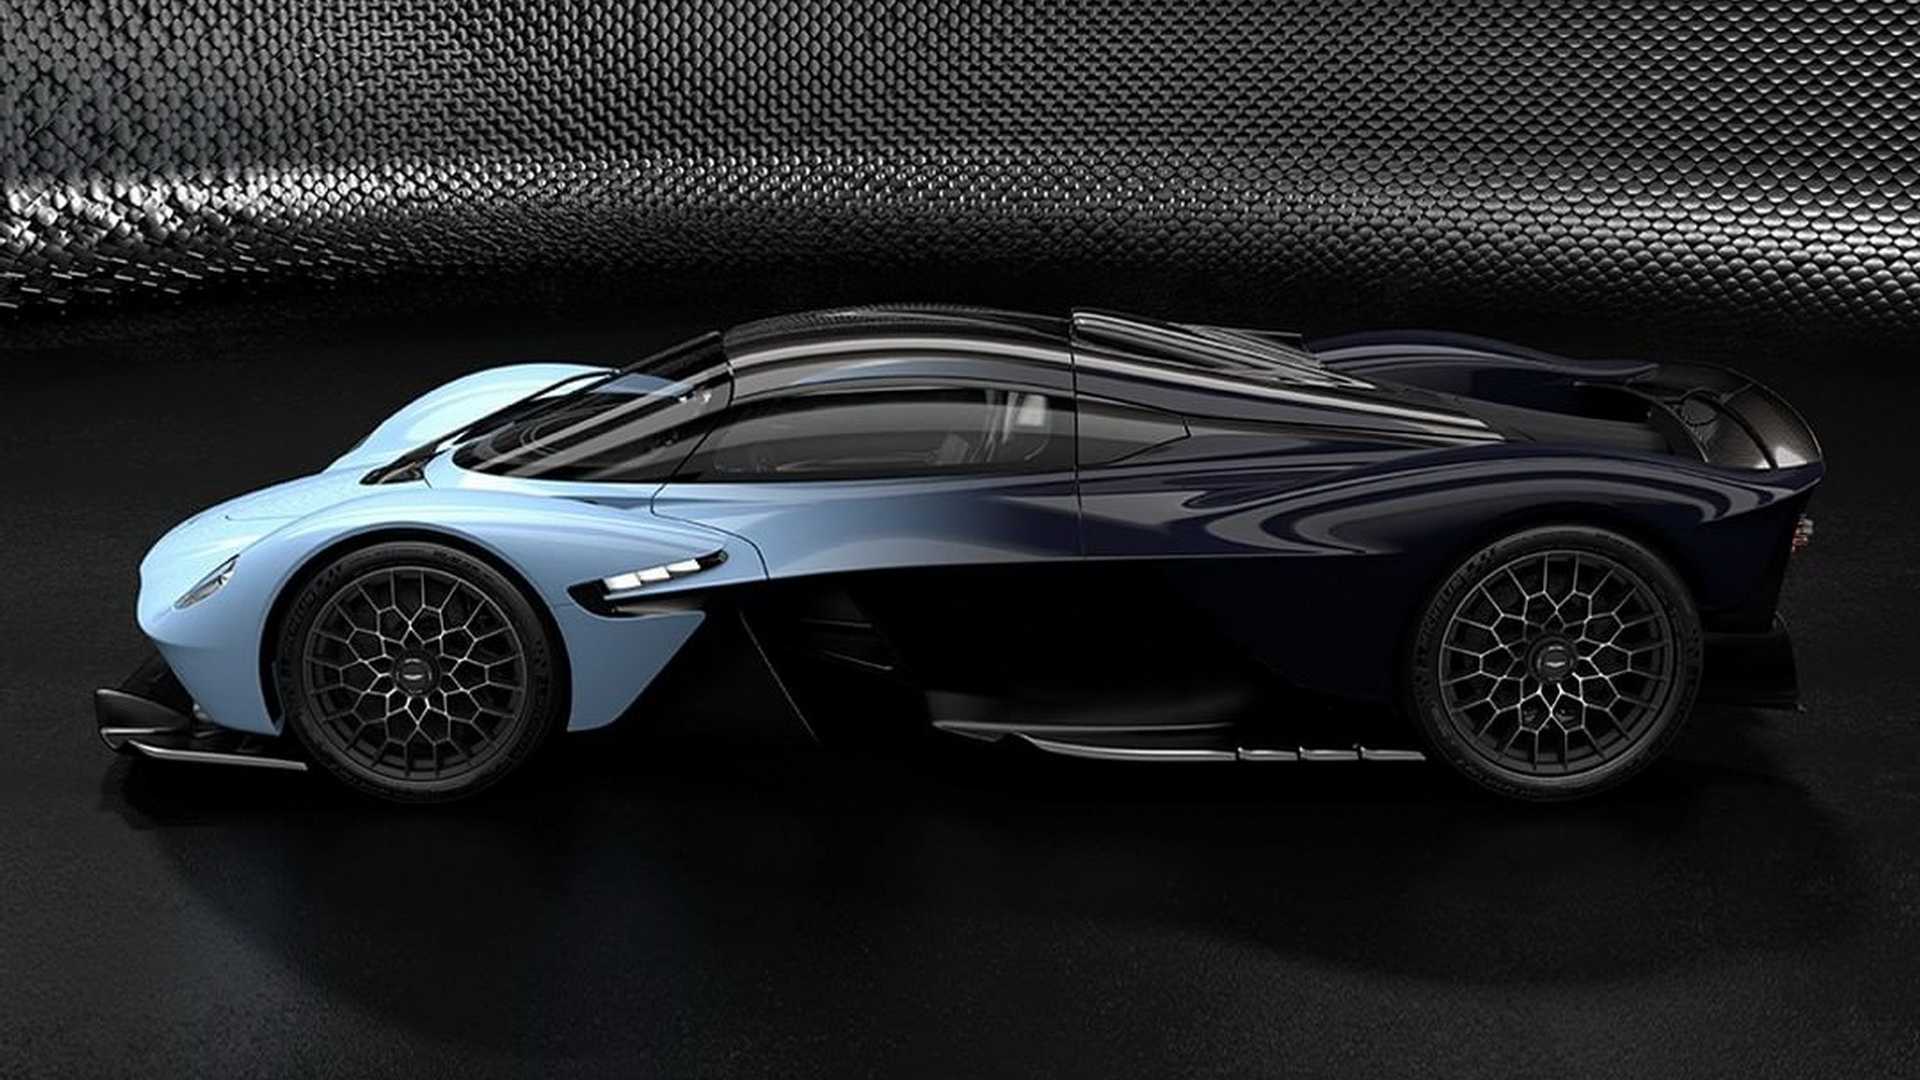 Aston Martin Valkyrie Looks Unworldly In New Official Image